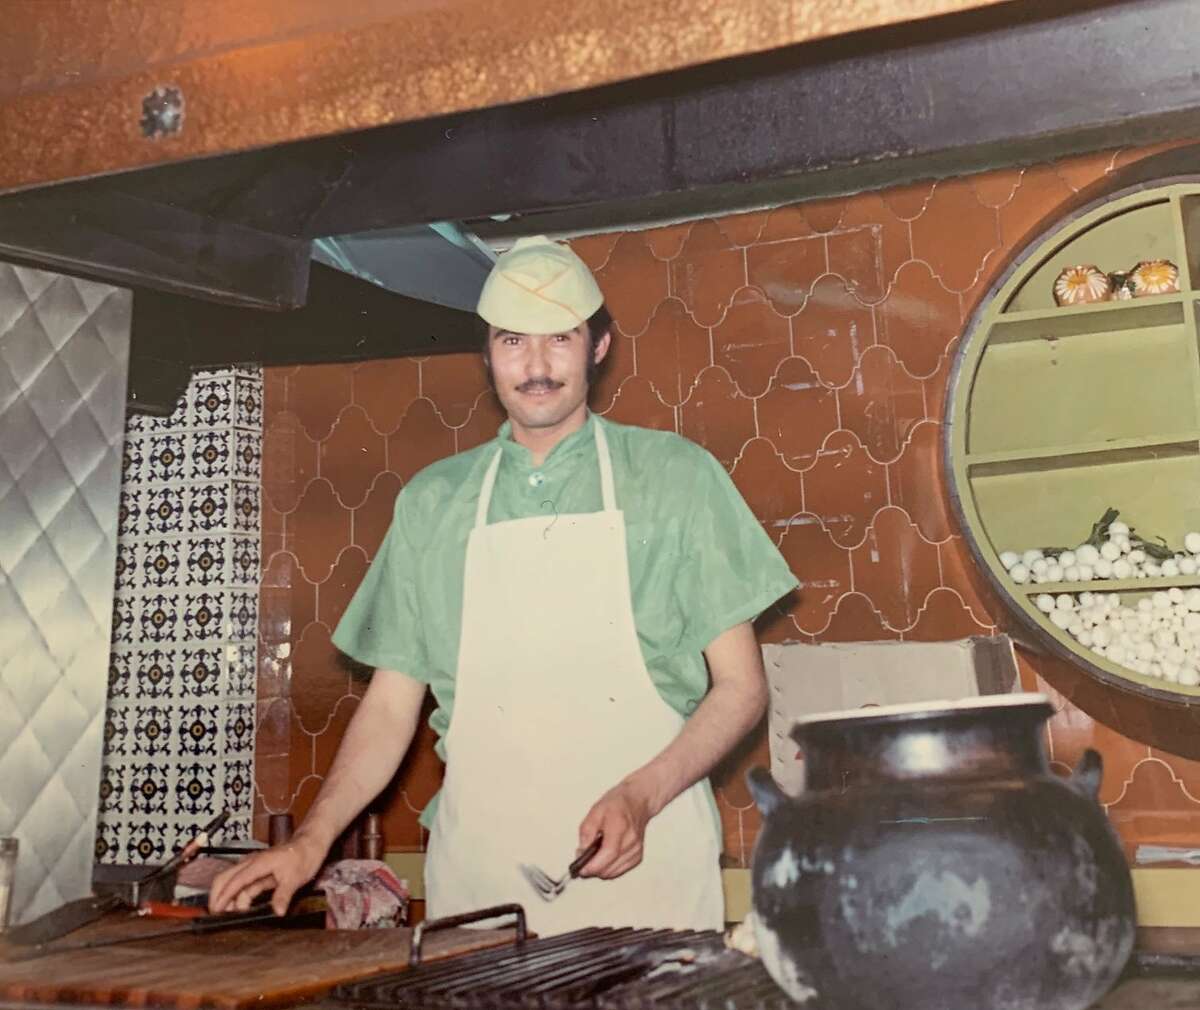 Salvador “Don Chava” Lopez in M�xico City in the early 1970s working at a Taqueria where he brought the famous Quesadilla Suiza.